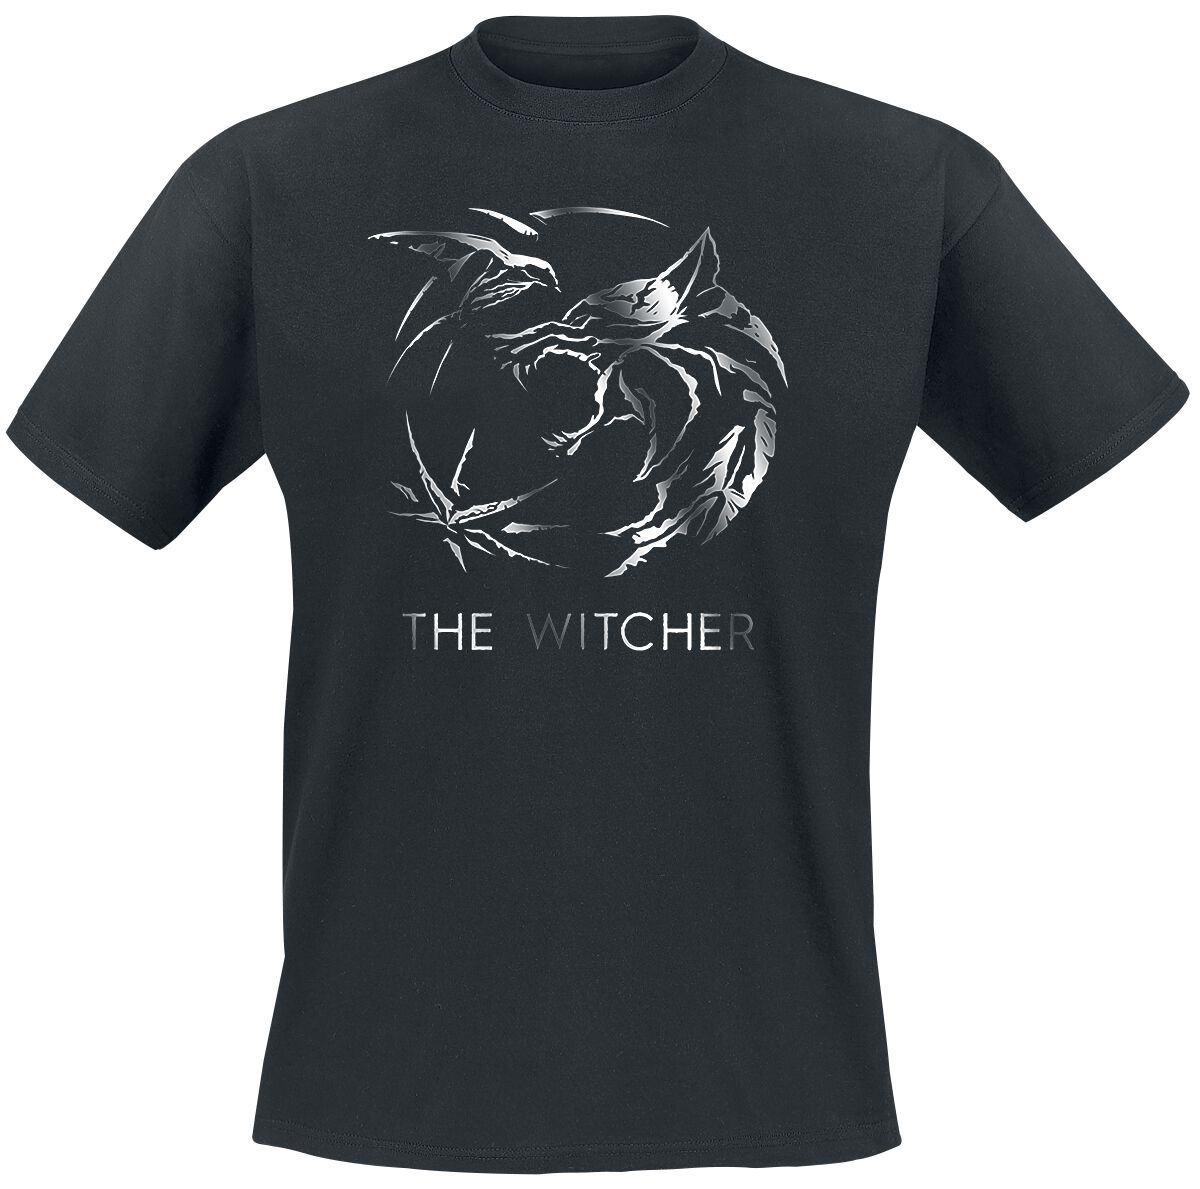 The Witcher Silver Logo T-Shirt black